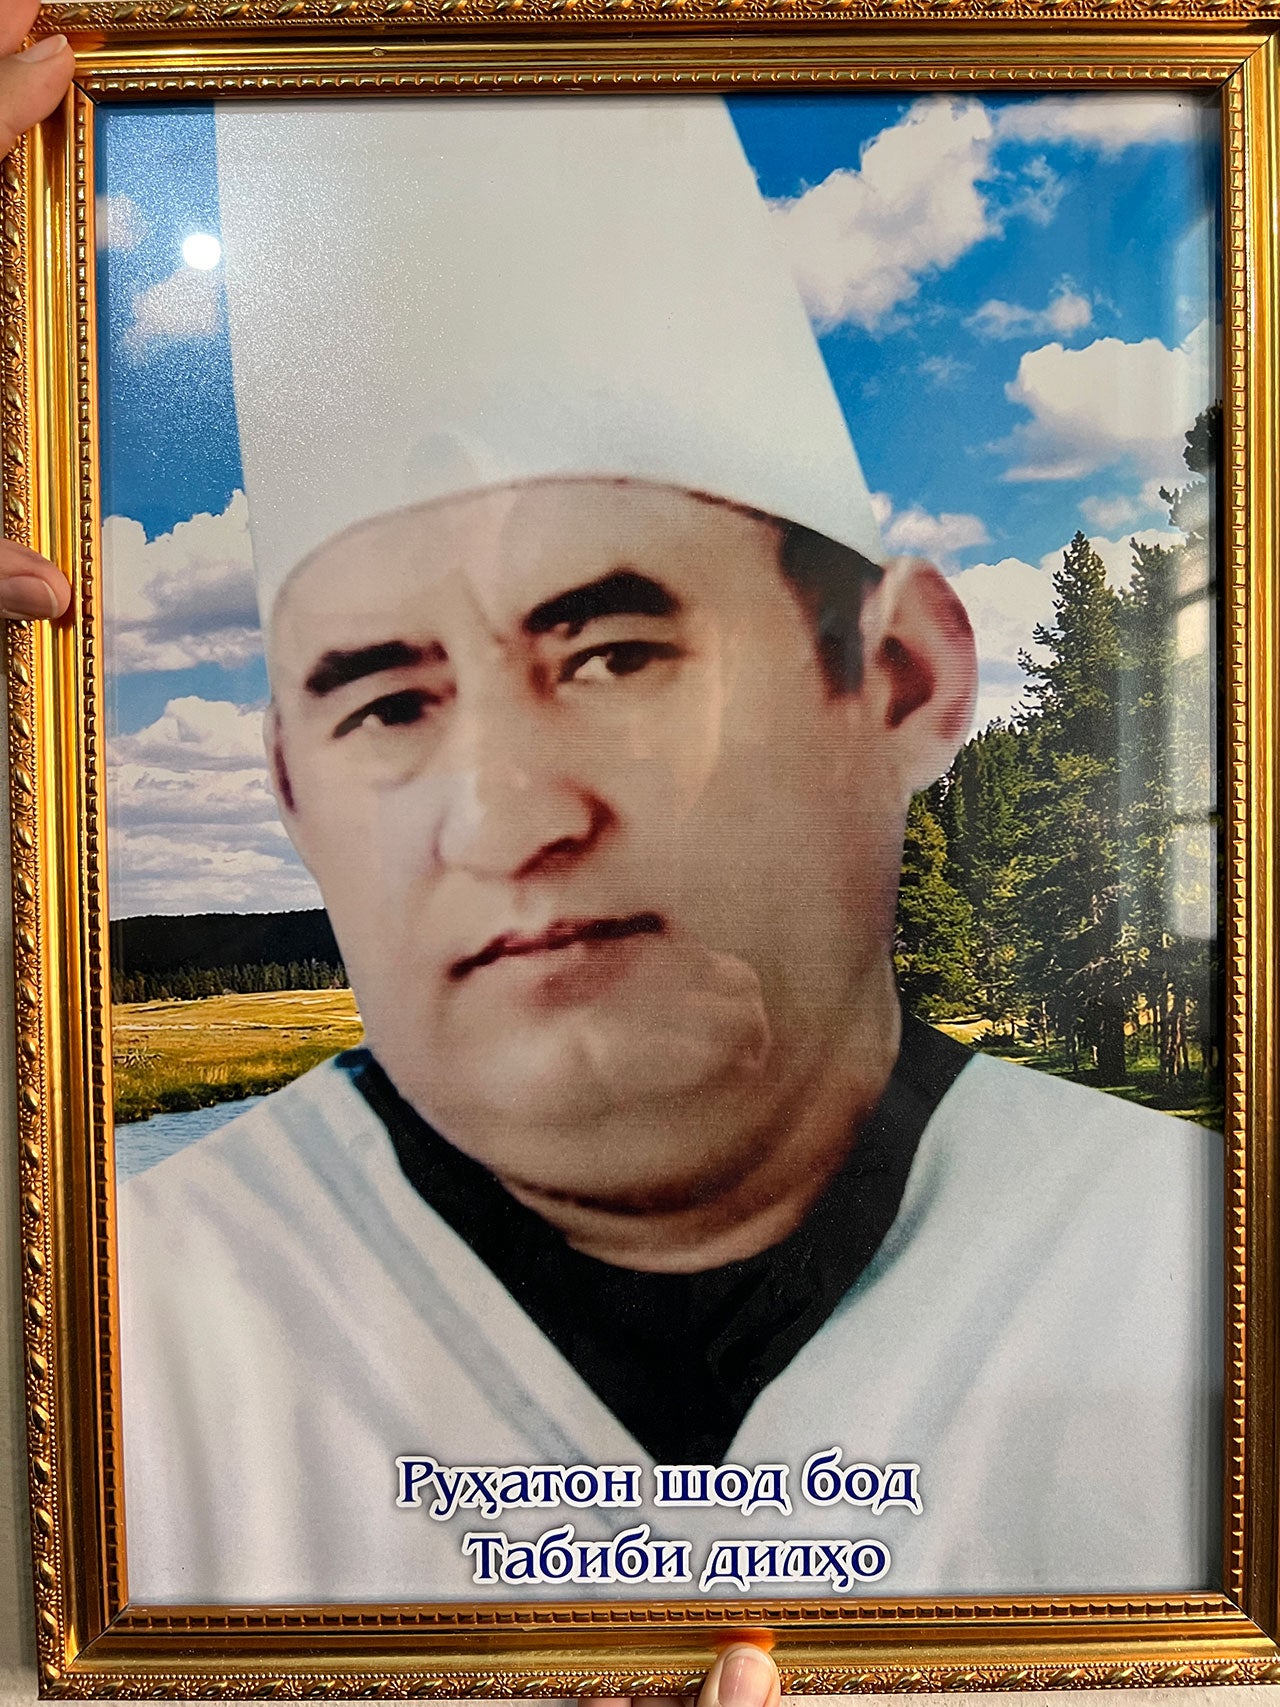 Solijon Rahimov, a 45-year-old doctor from Tajikistan, was killed on September 16, 2022, in an attack on an ambulance in Ovchi Kal’acha. The shots came from the hills controlled by the Kyrgyz military.